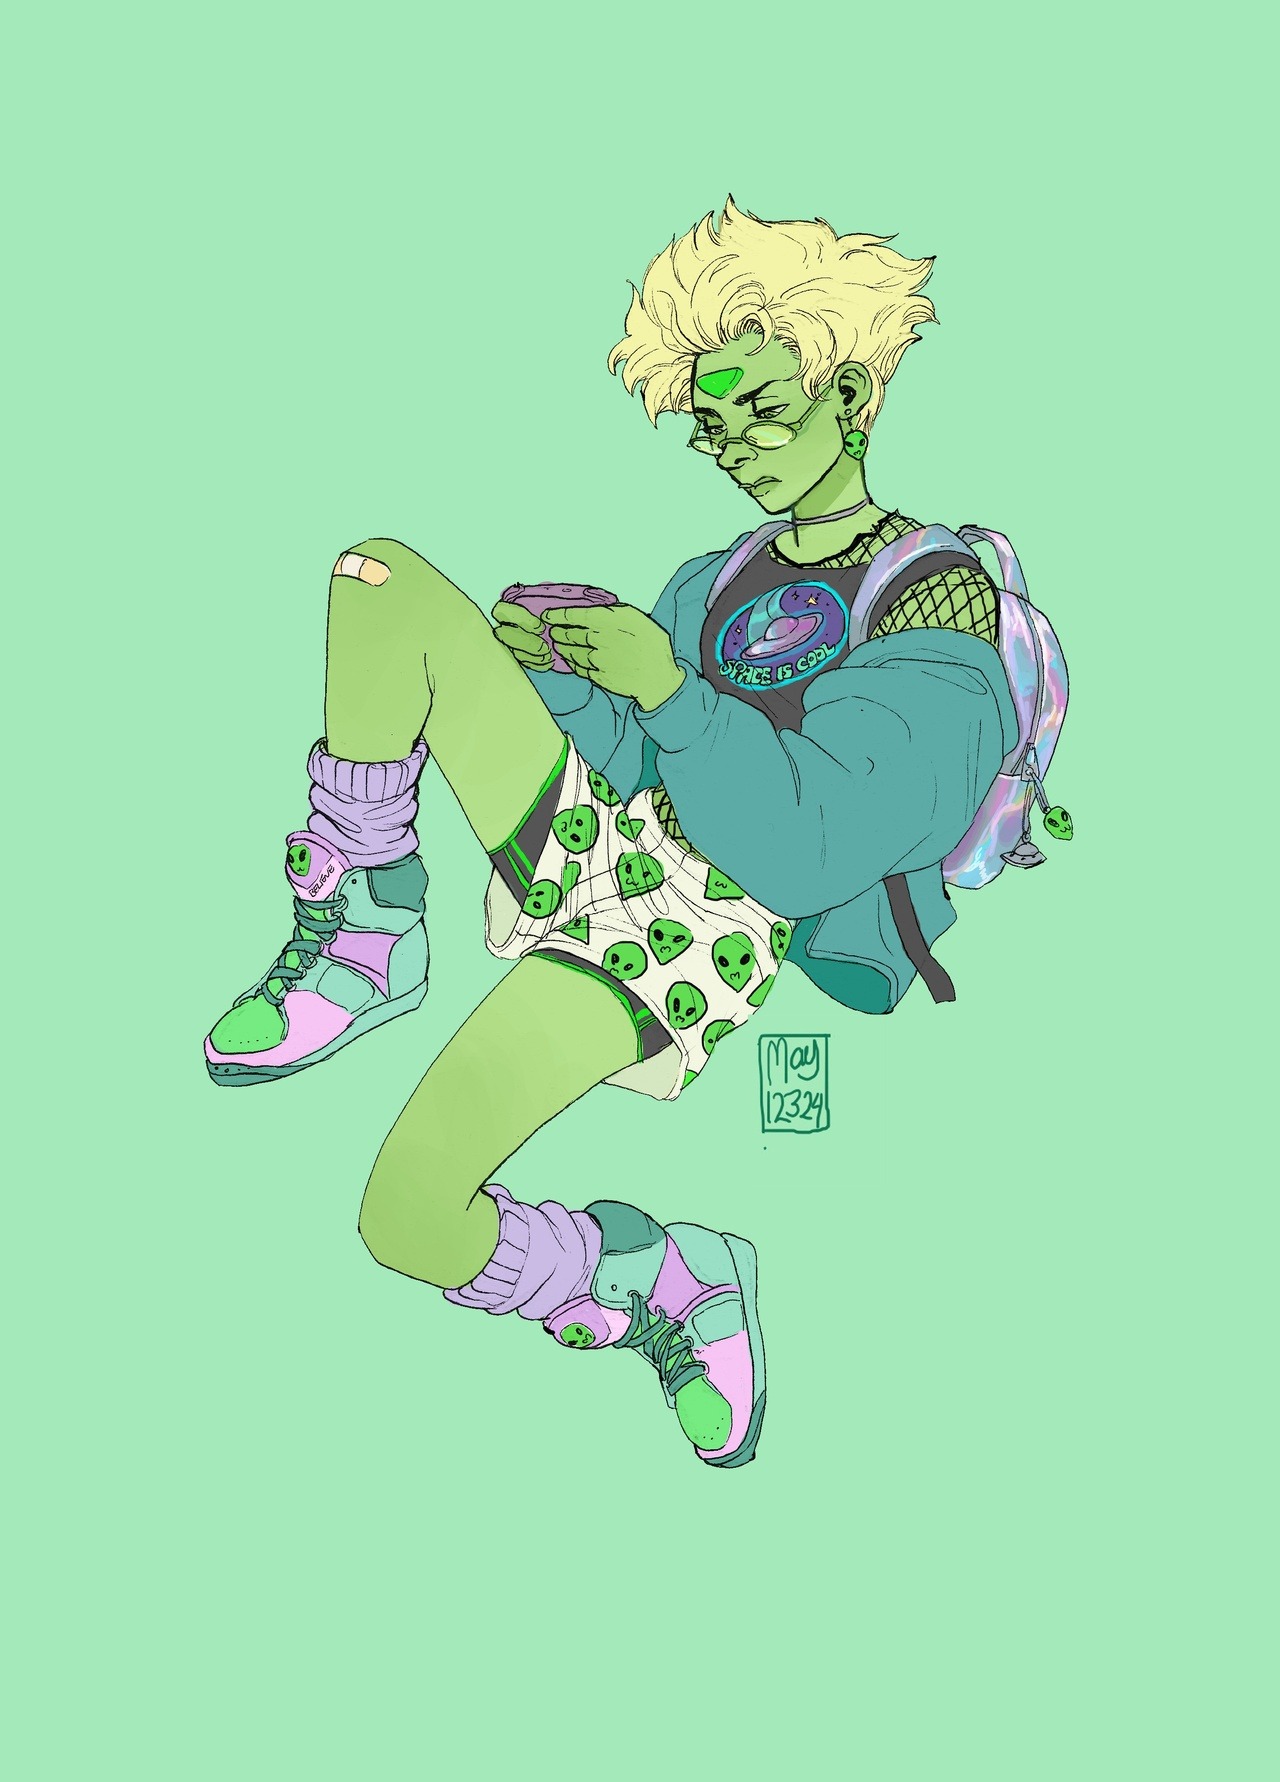 Peridot!!! 👽👽👽 To match my fashion series of the Crystal Gems here! They’ll all be available as mini prints at Smash! (14 - 15 of July!)